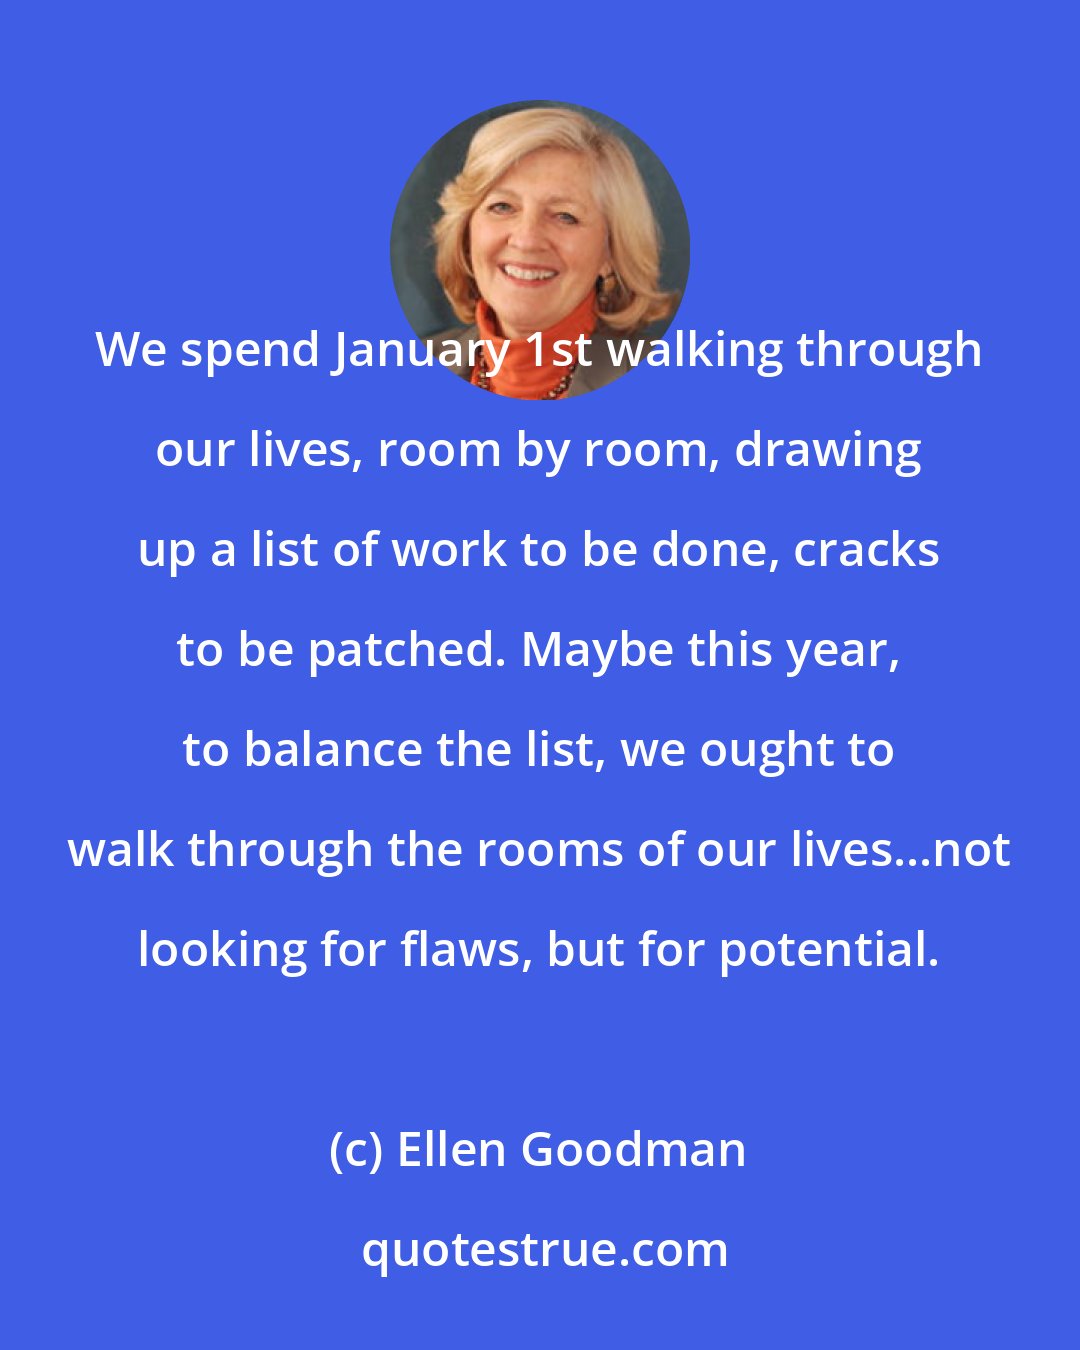 Ellen Goodman: We spend January 1st walking through our lives, room by room, drawing up a list of work to be done, cracks to be patched. Maybe this year, to balance the list, we ought to walk through the rooms of our lives...not looking for flaws, but for potential.